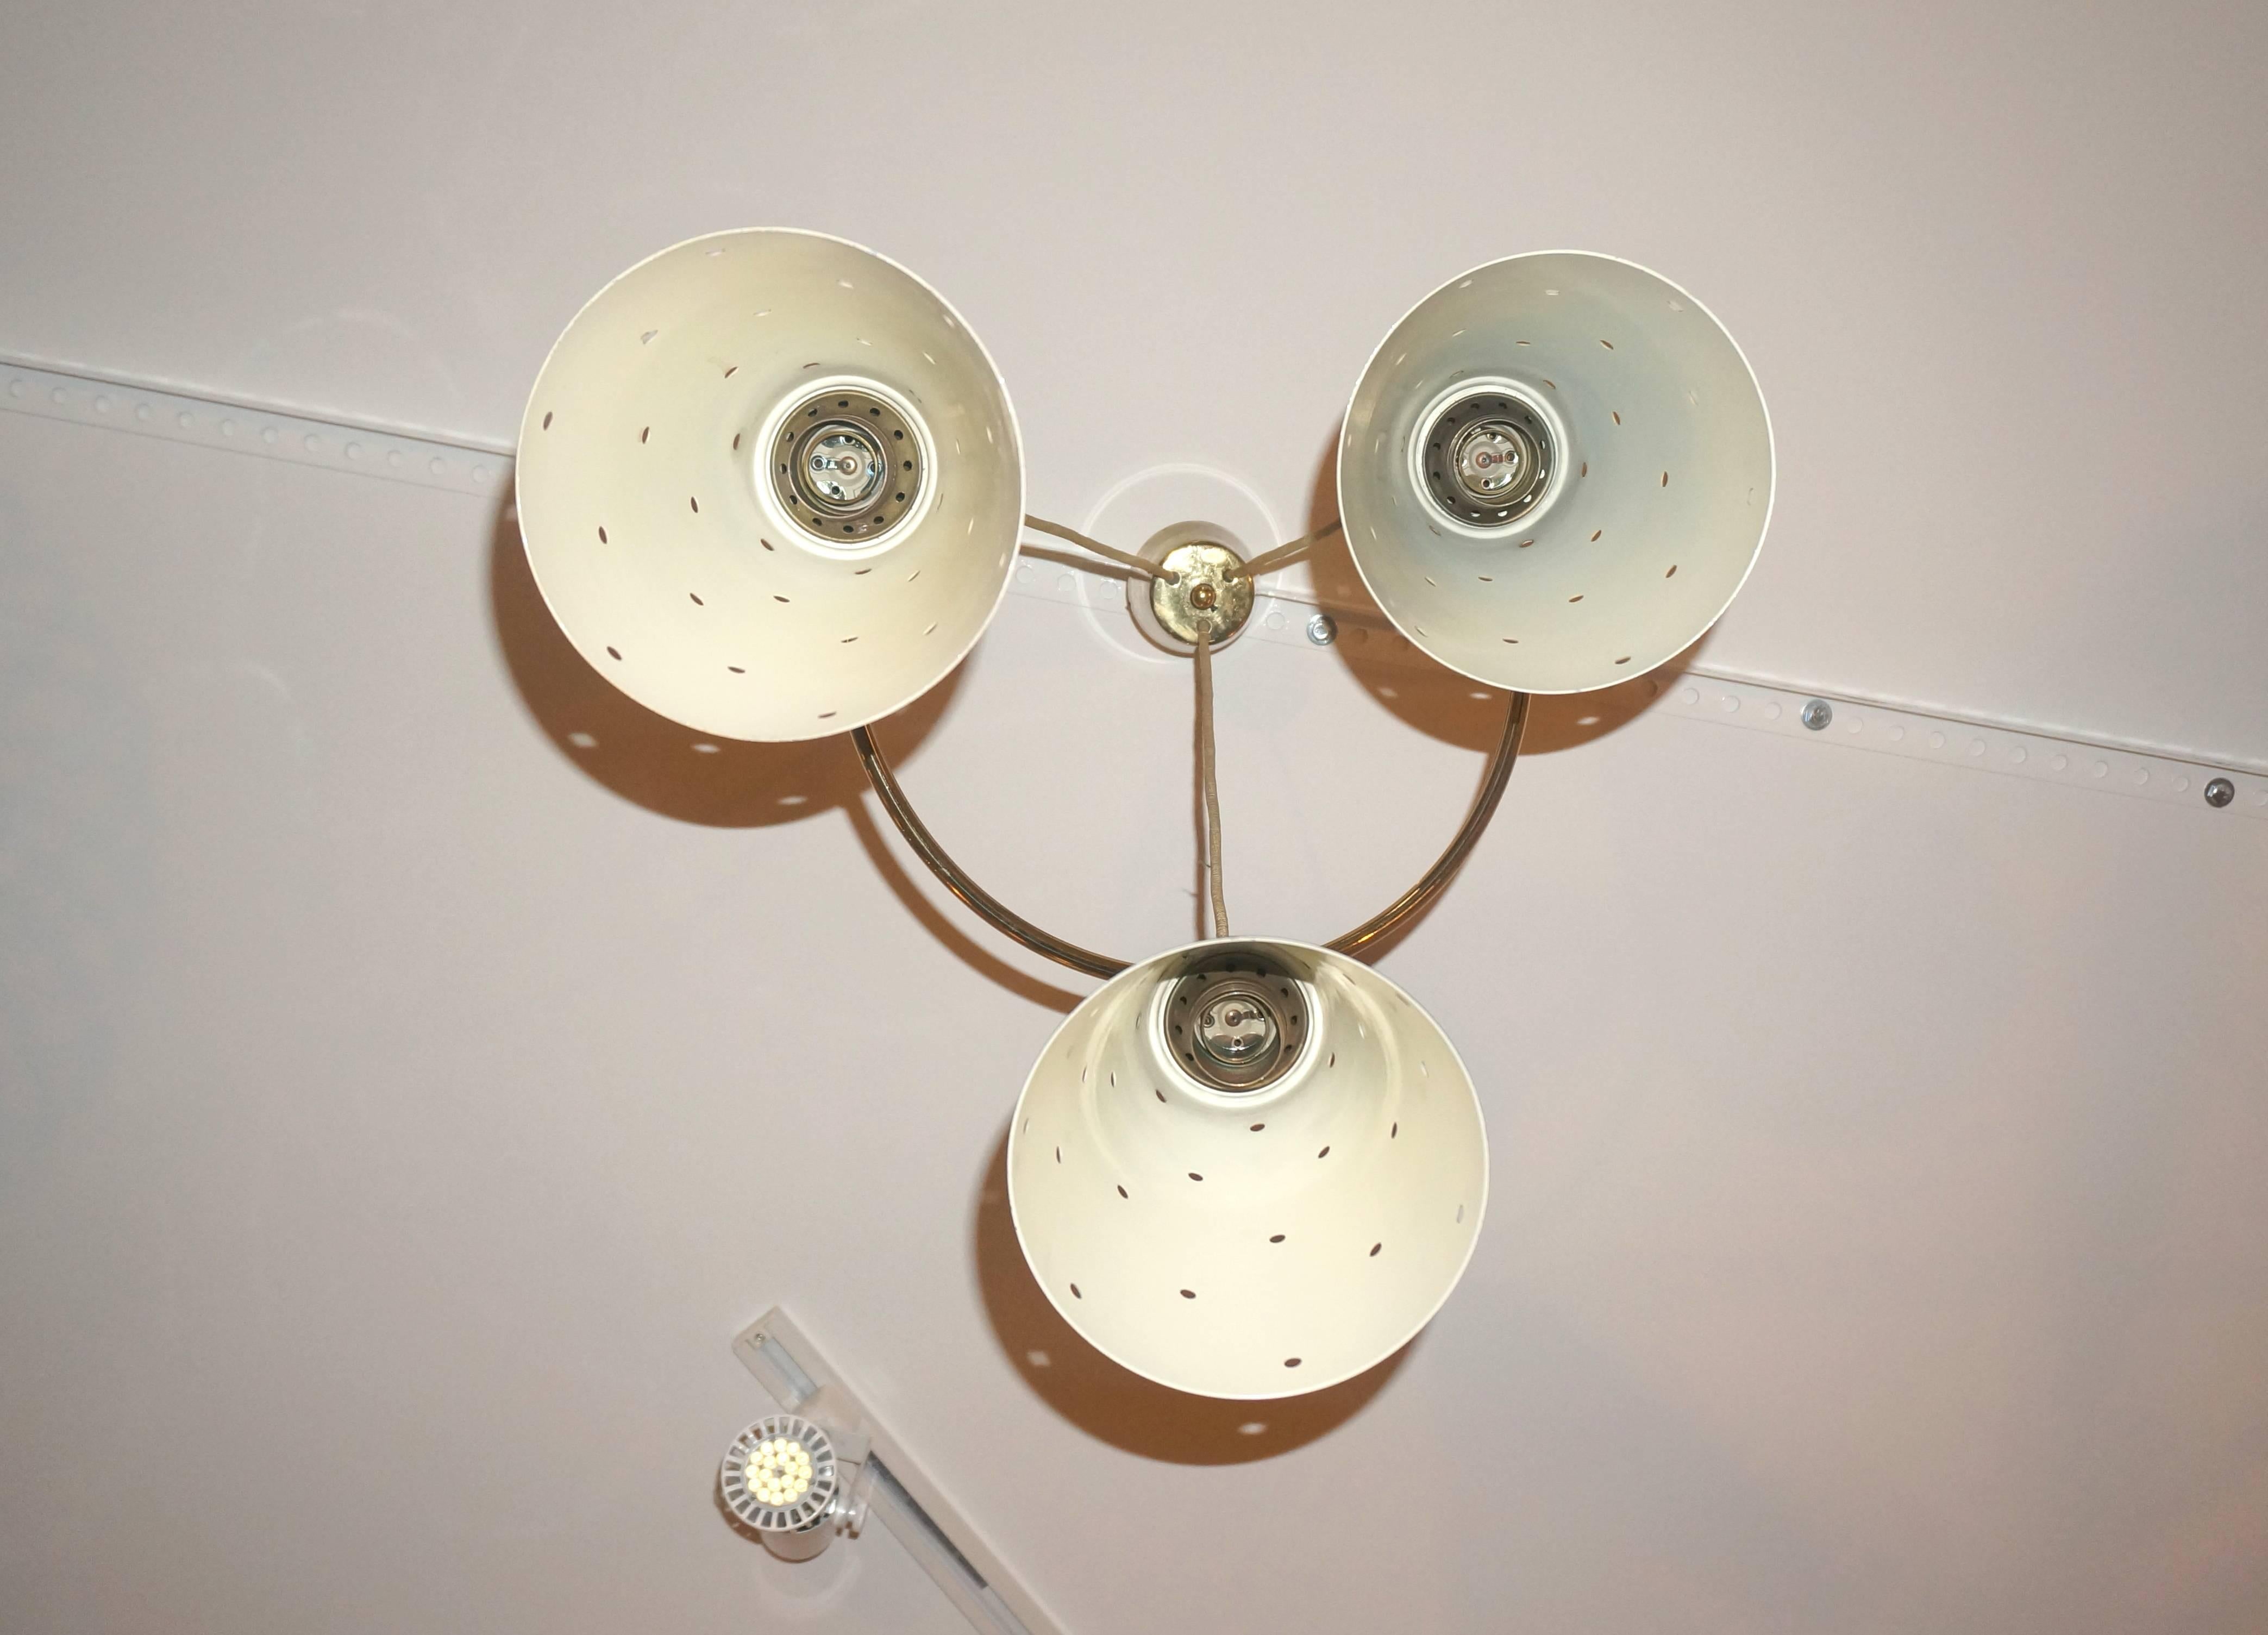 This Mid-Century Modern chandelier was produced in Italy in the 1950s. The three suspended metal shades are painted in enamel colors of burnt orange, black and cream. The hardware is polished brass and the electrical cords are wrapped in a